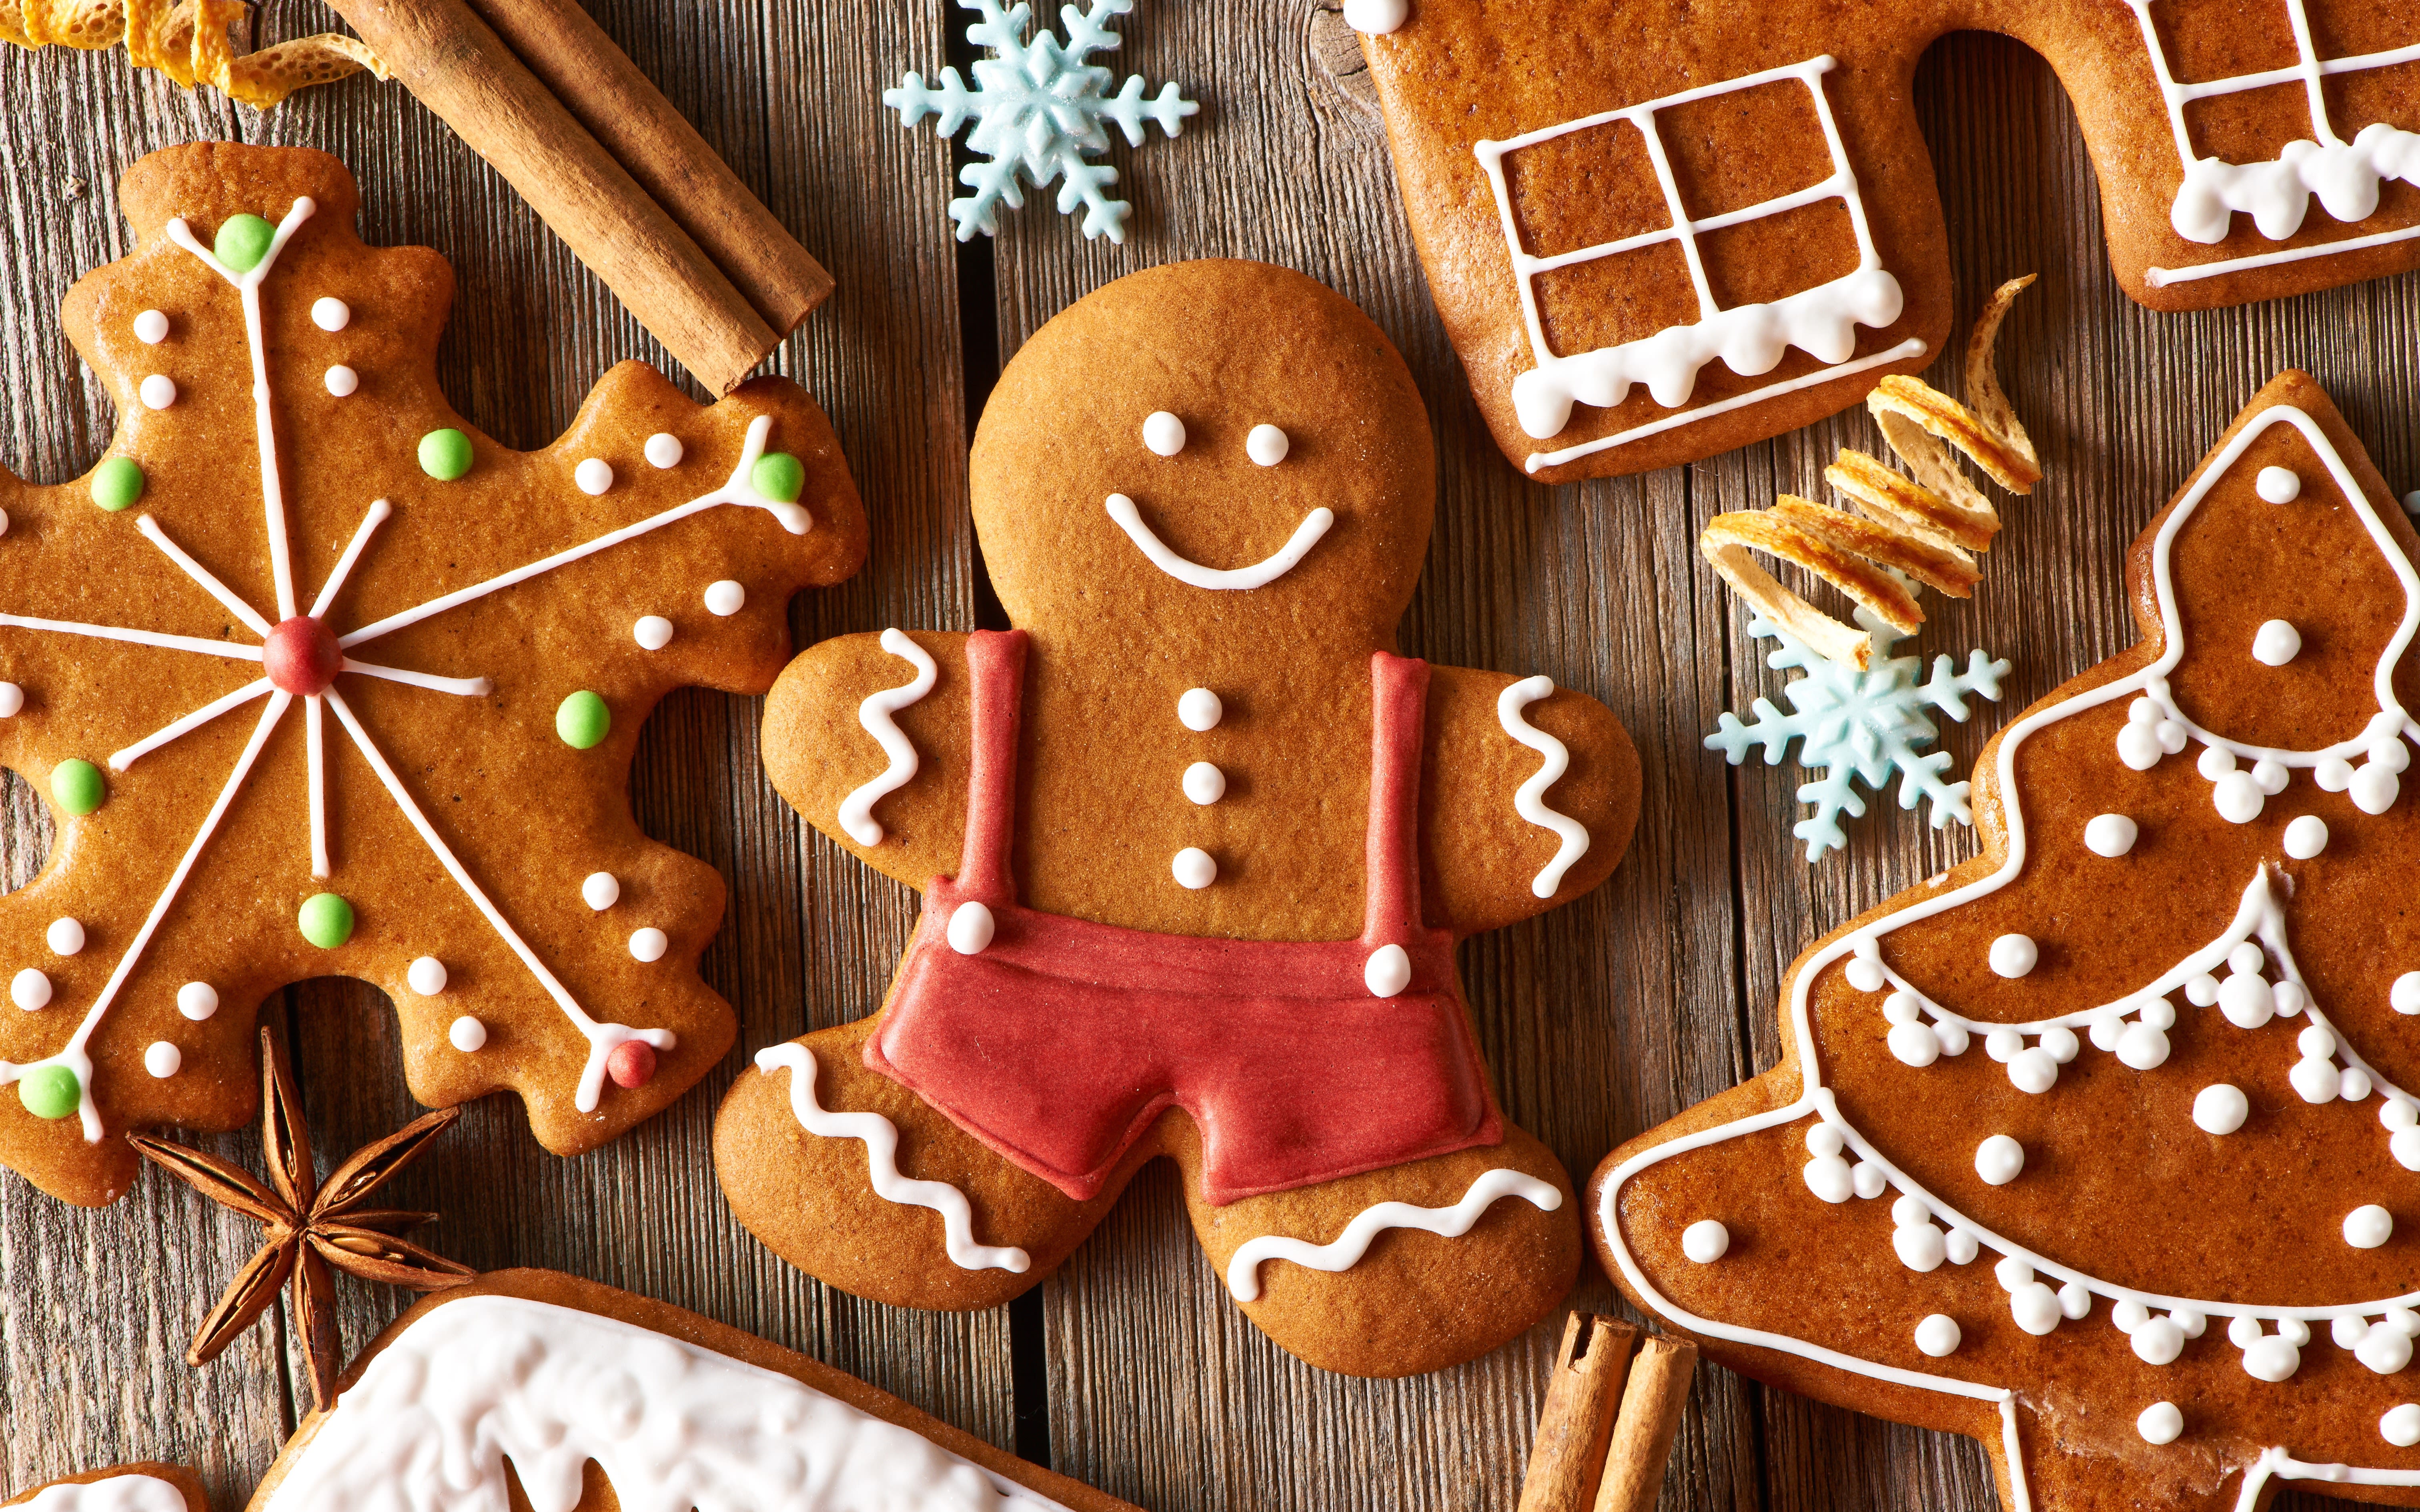 An image of Christmas gingerbread biscuits